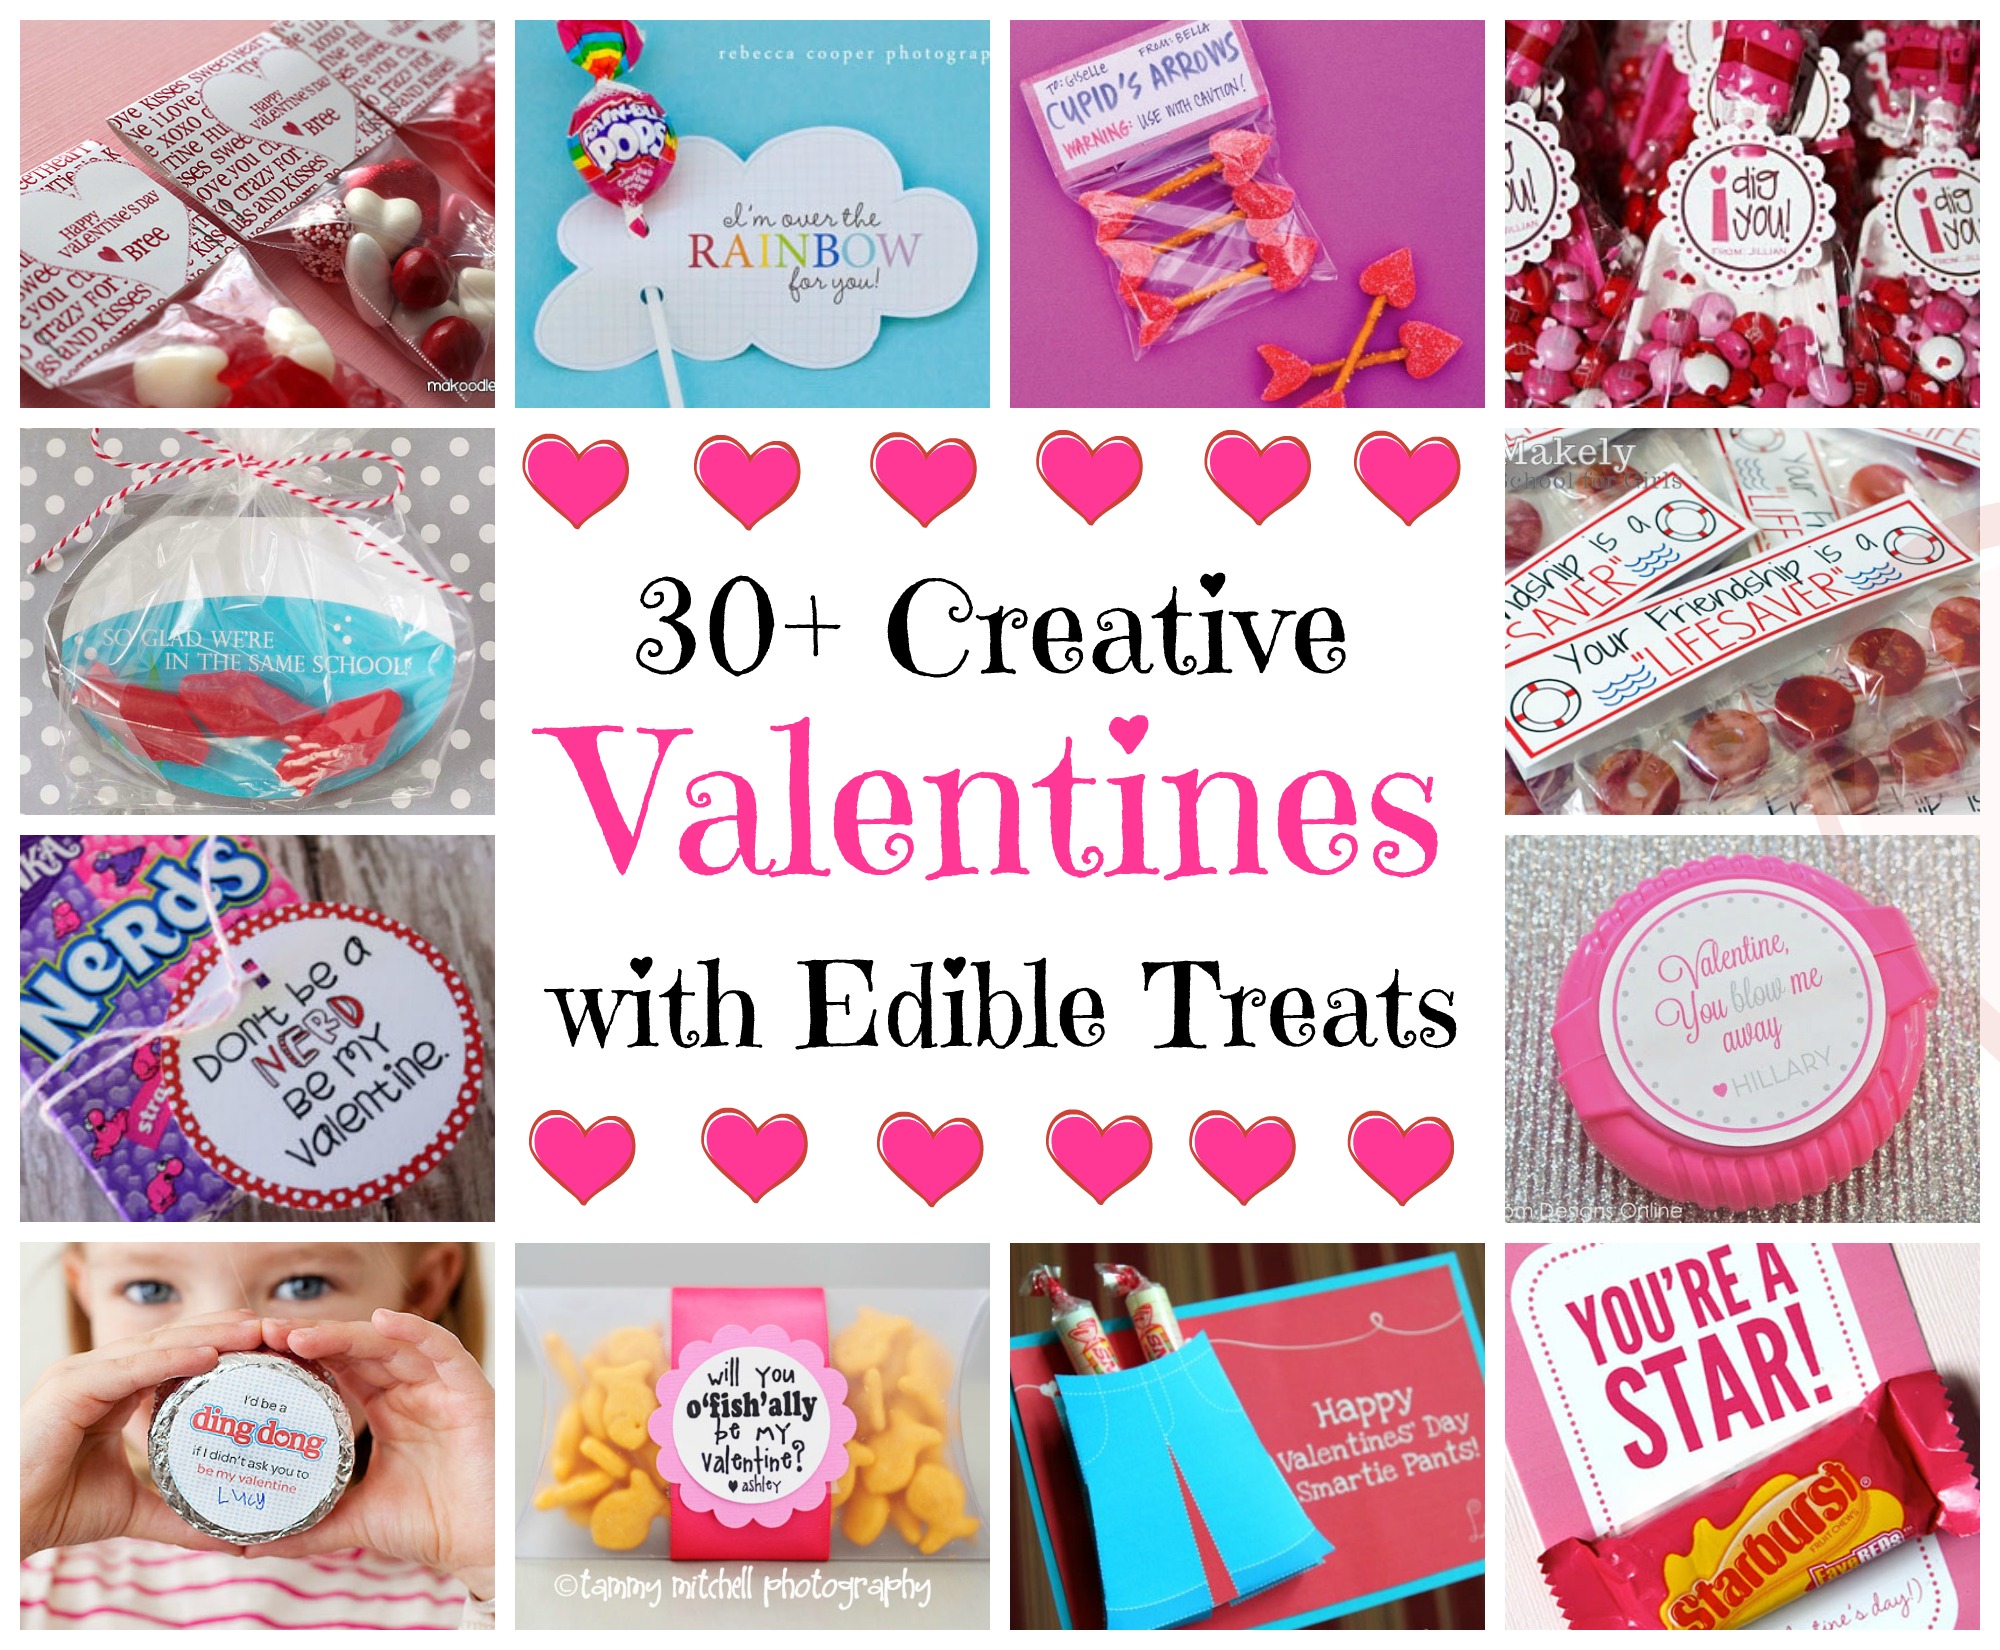 Valentines with Edible Treats